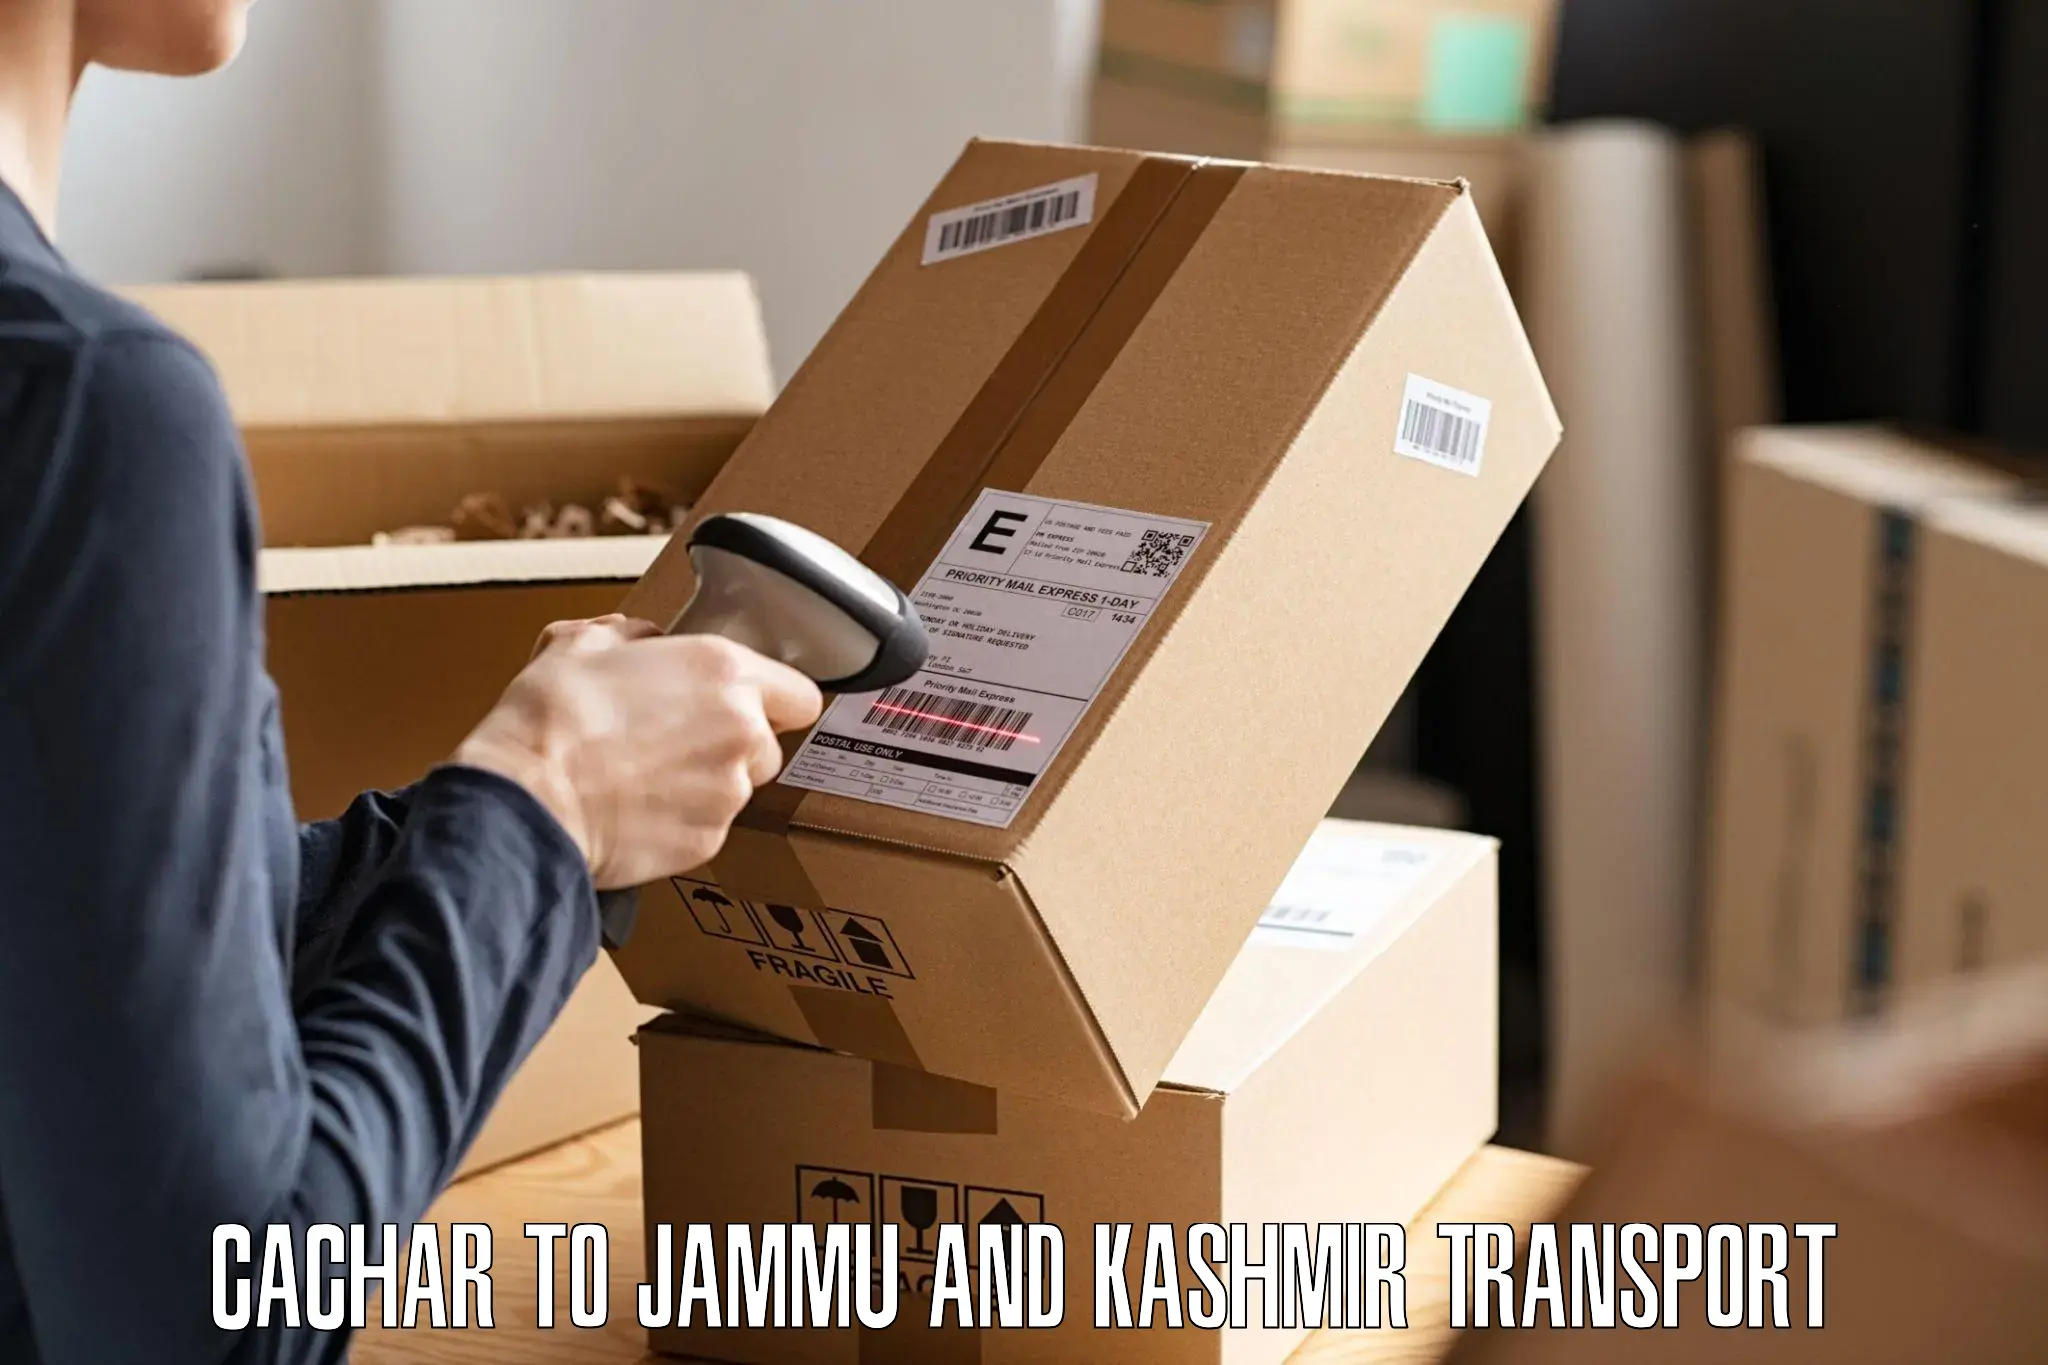 Luggage transport services Cachar to Baramulla